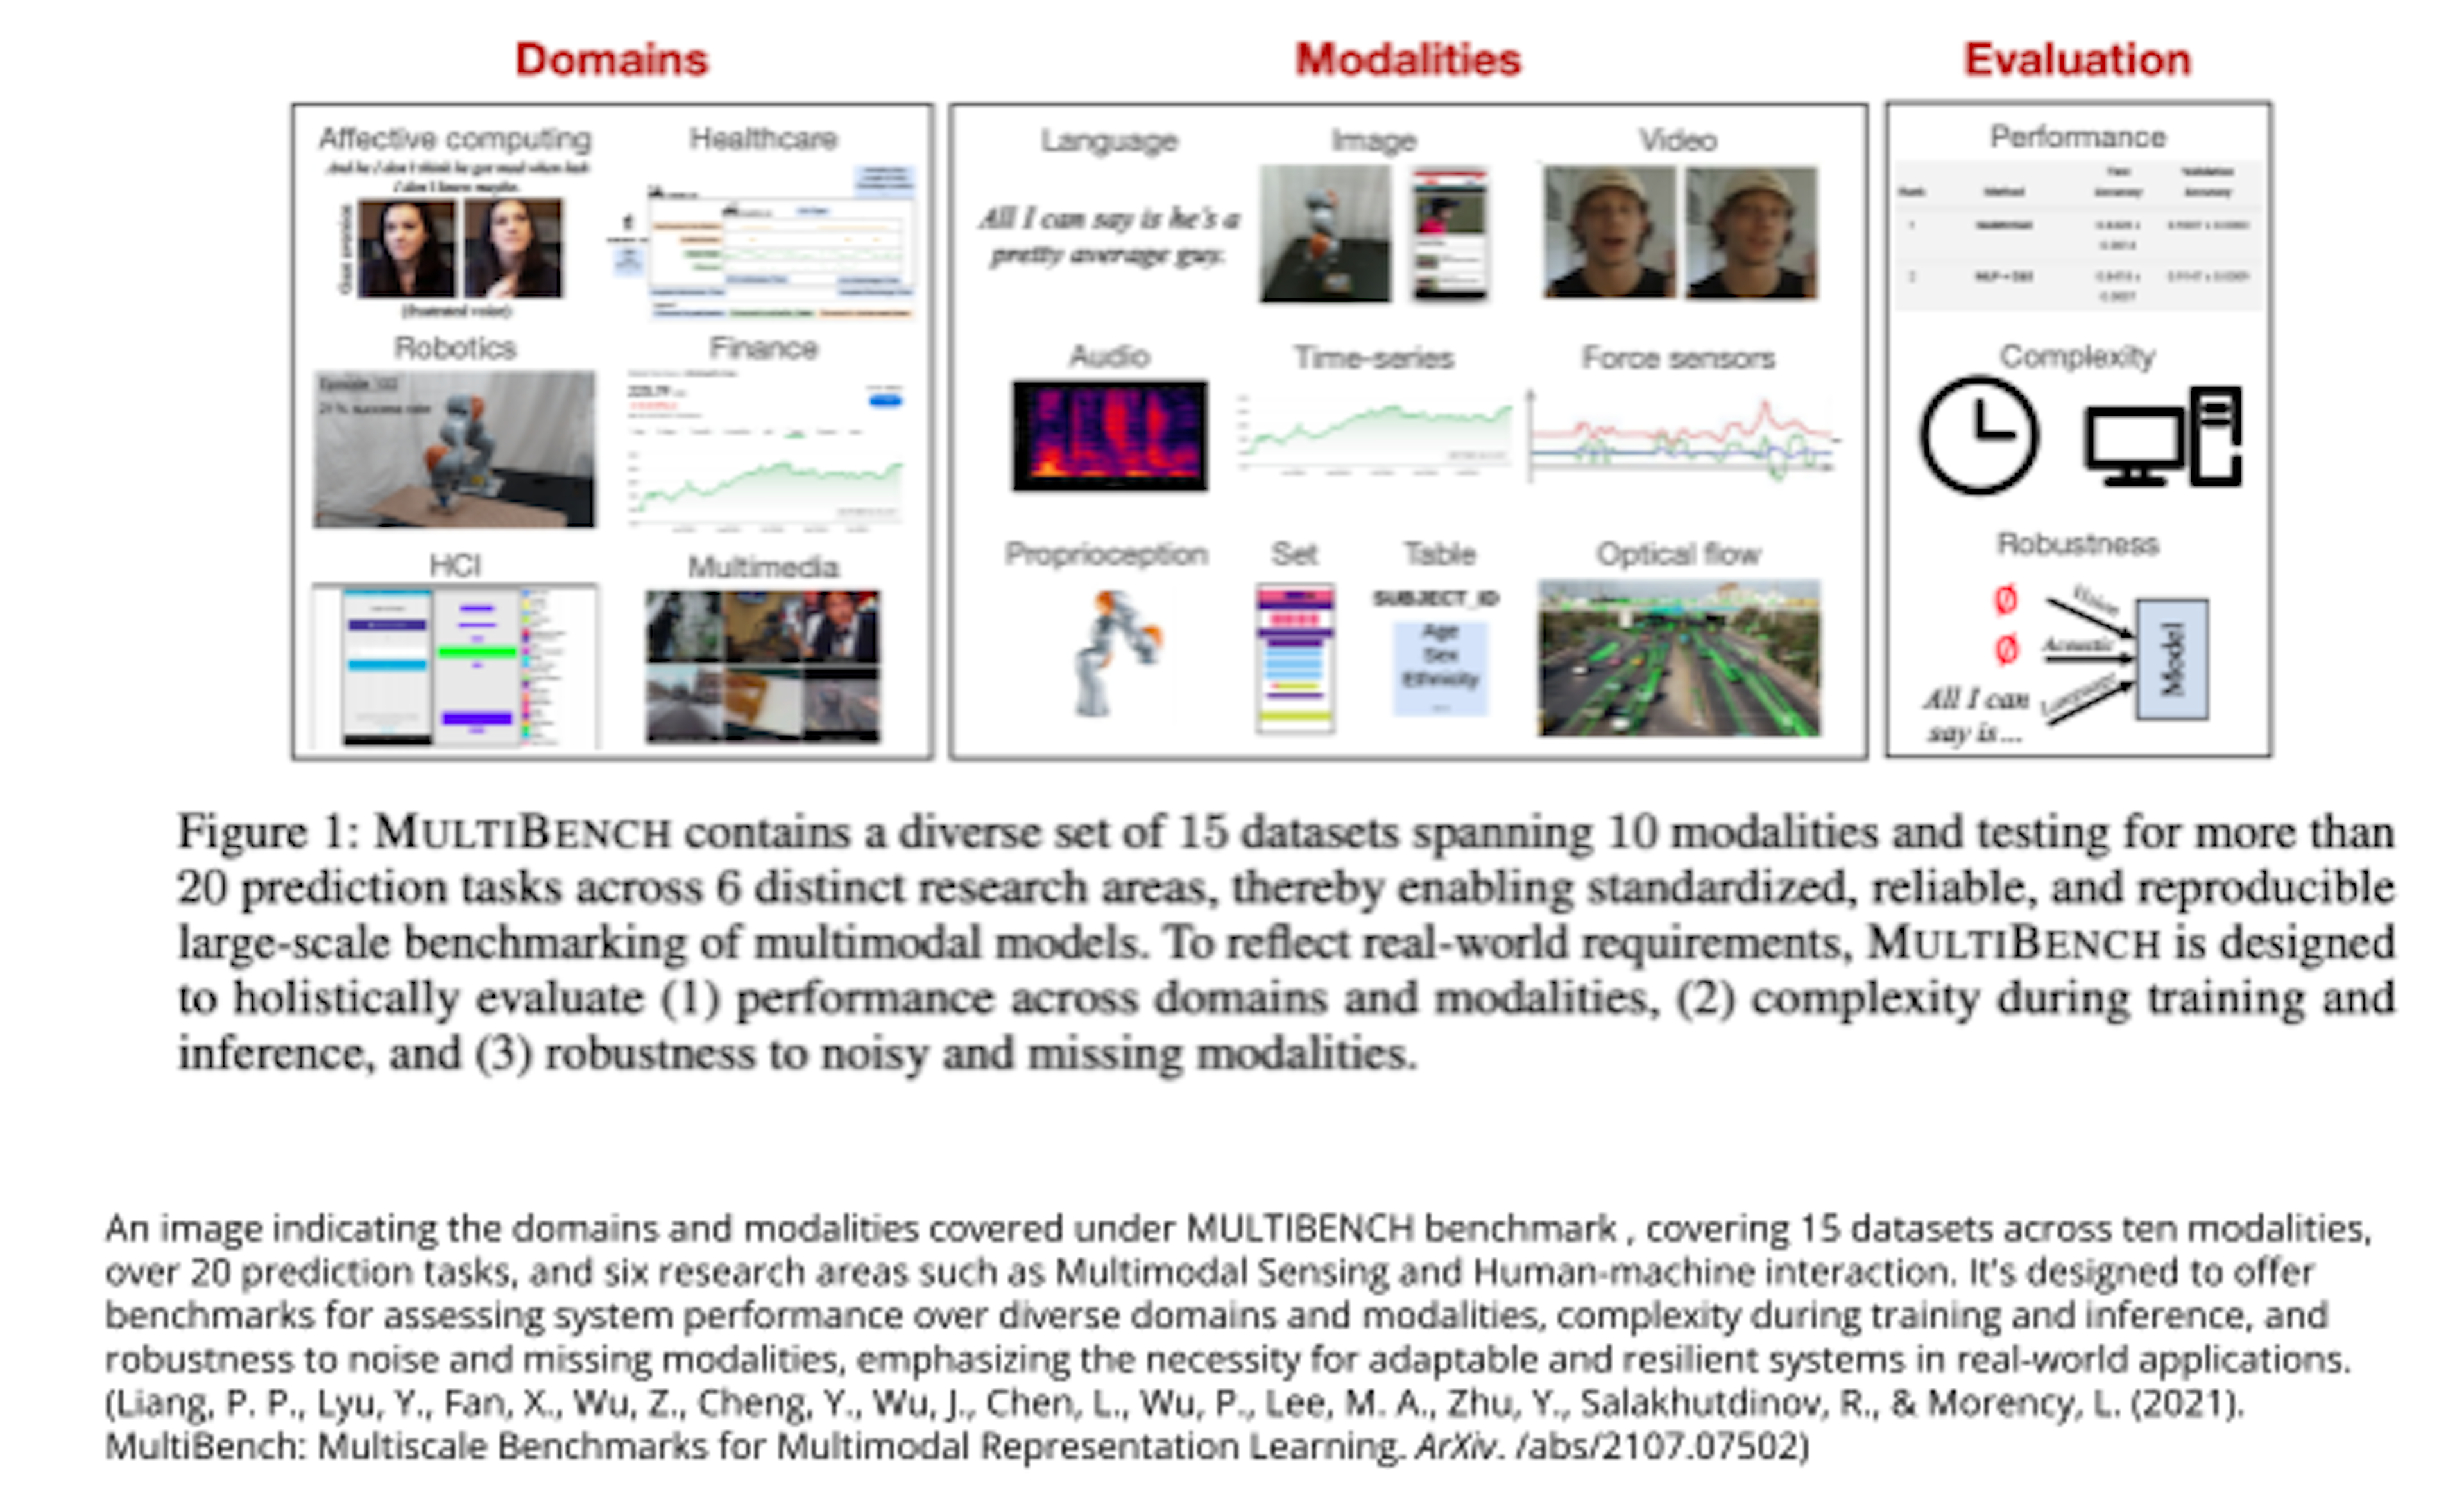 An image indicating the domains and modalities covered under MULTIBENCH benchmark , covering 15 datasets across ten modalities, over 20 prediction tasks, and six research areas such as Multimodal Sensing and Human-machine interaction. It's designed to offer benchmarks for assessing system performance over diverse domains and modalities, complexity during training and inference, and robustness to noise and missing modalities, emphasizing the necessity for adaptable and resilient systems in real-world applications. (Liang, P. P., Lyu, Y., Fan, X., Wu, Z., Cheng, Y., Wu, J., Chen, L., Wu, P., Lee, M. A., Zhu, Y., Salakhutdinov, R., & Morency, L. (2021). MultiBench: Multiscale Benchmarks for Multimodal Representation Learning. ArXiv. /abs/2107.07502)